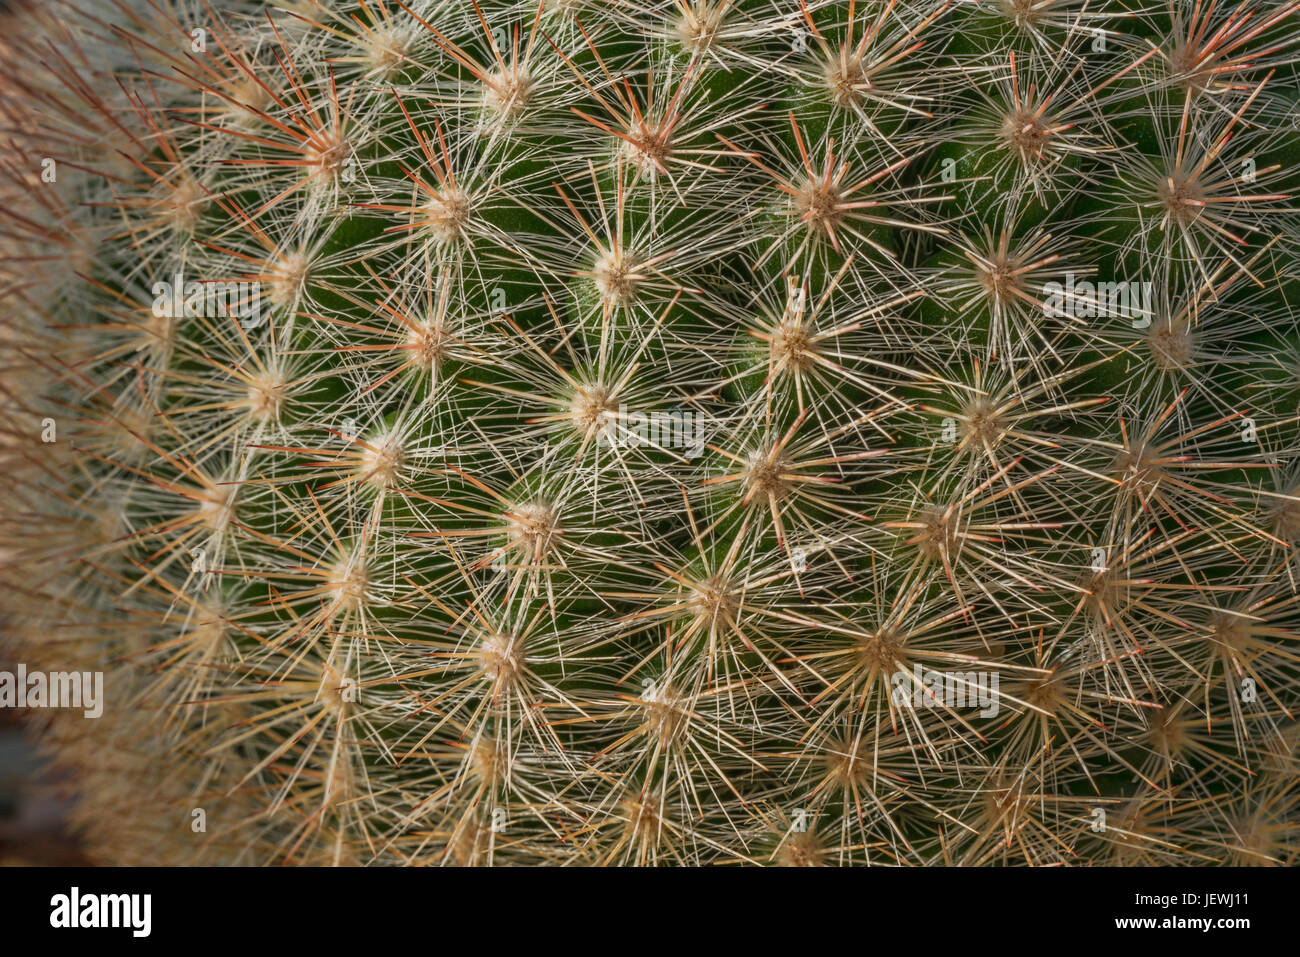 Cactus with spines Stock Photo